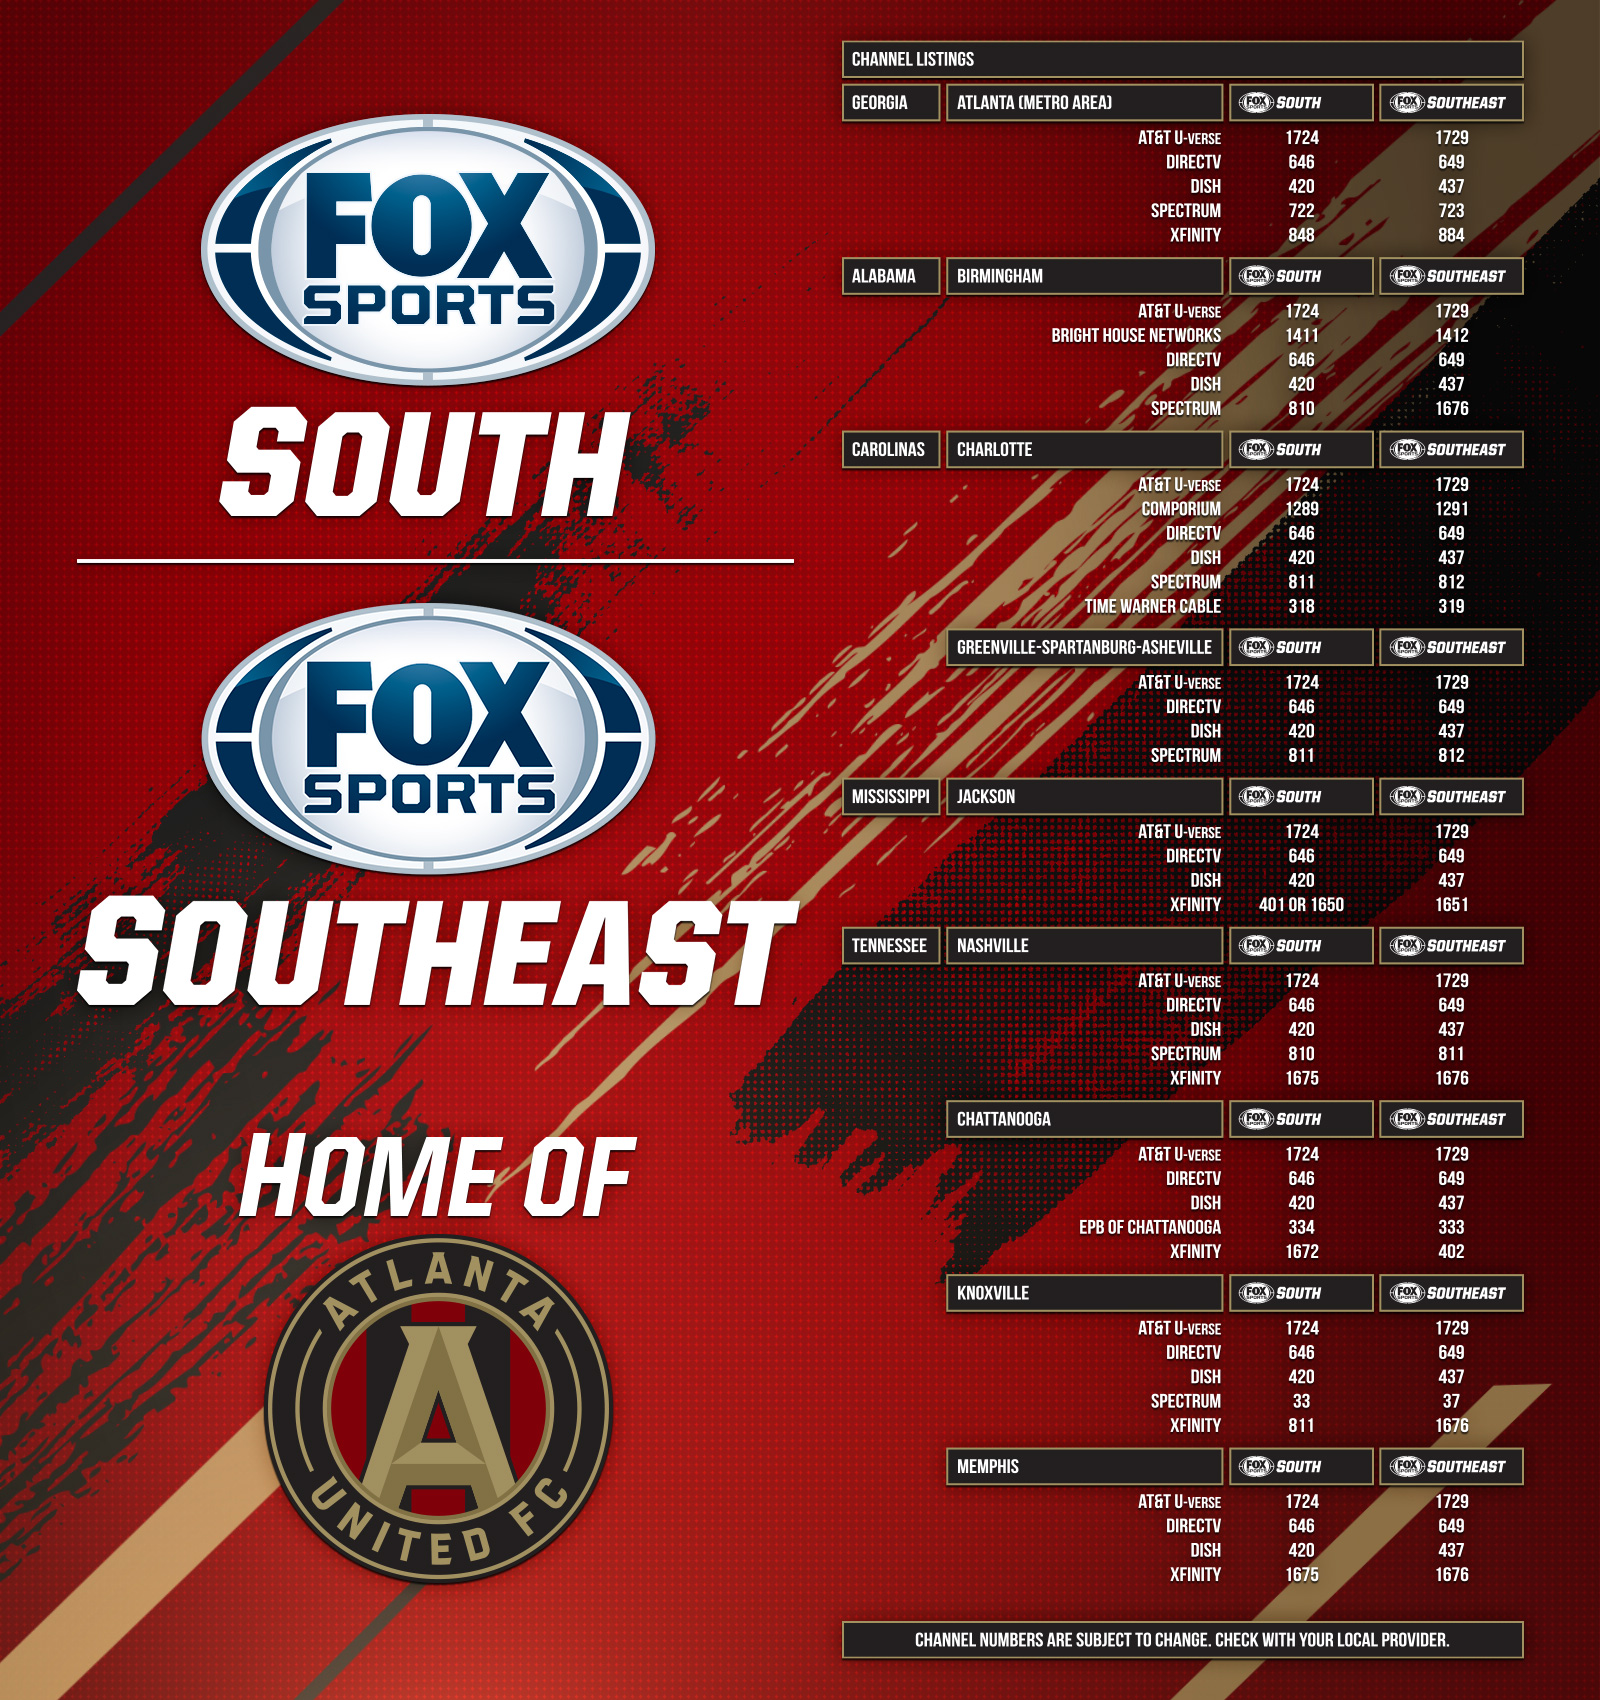 Channel guide to Atlanta United games